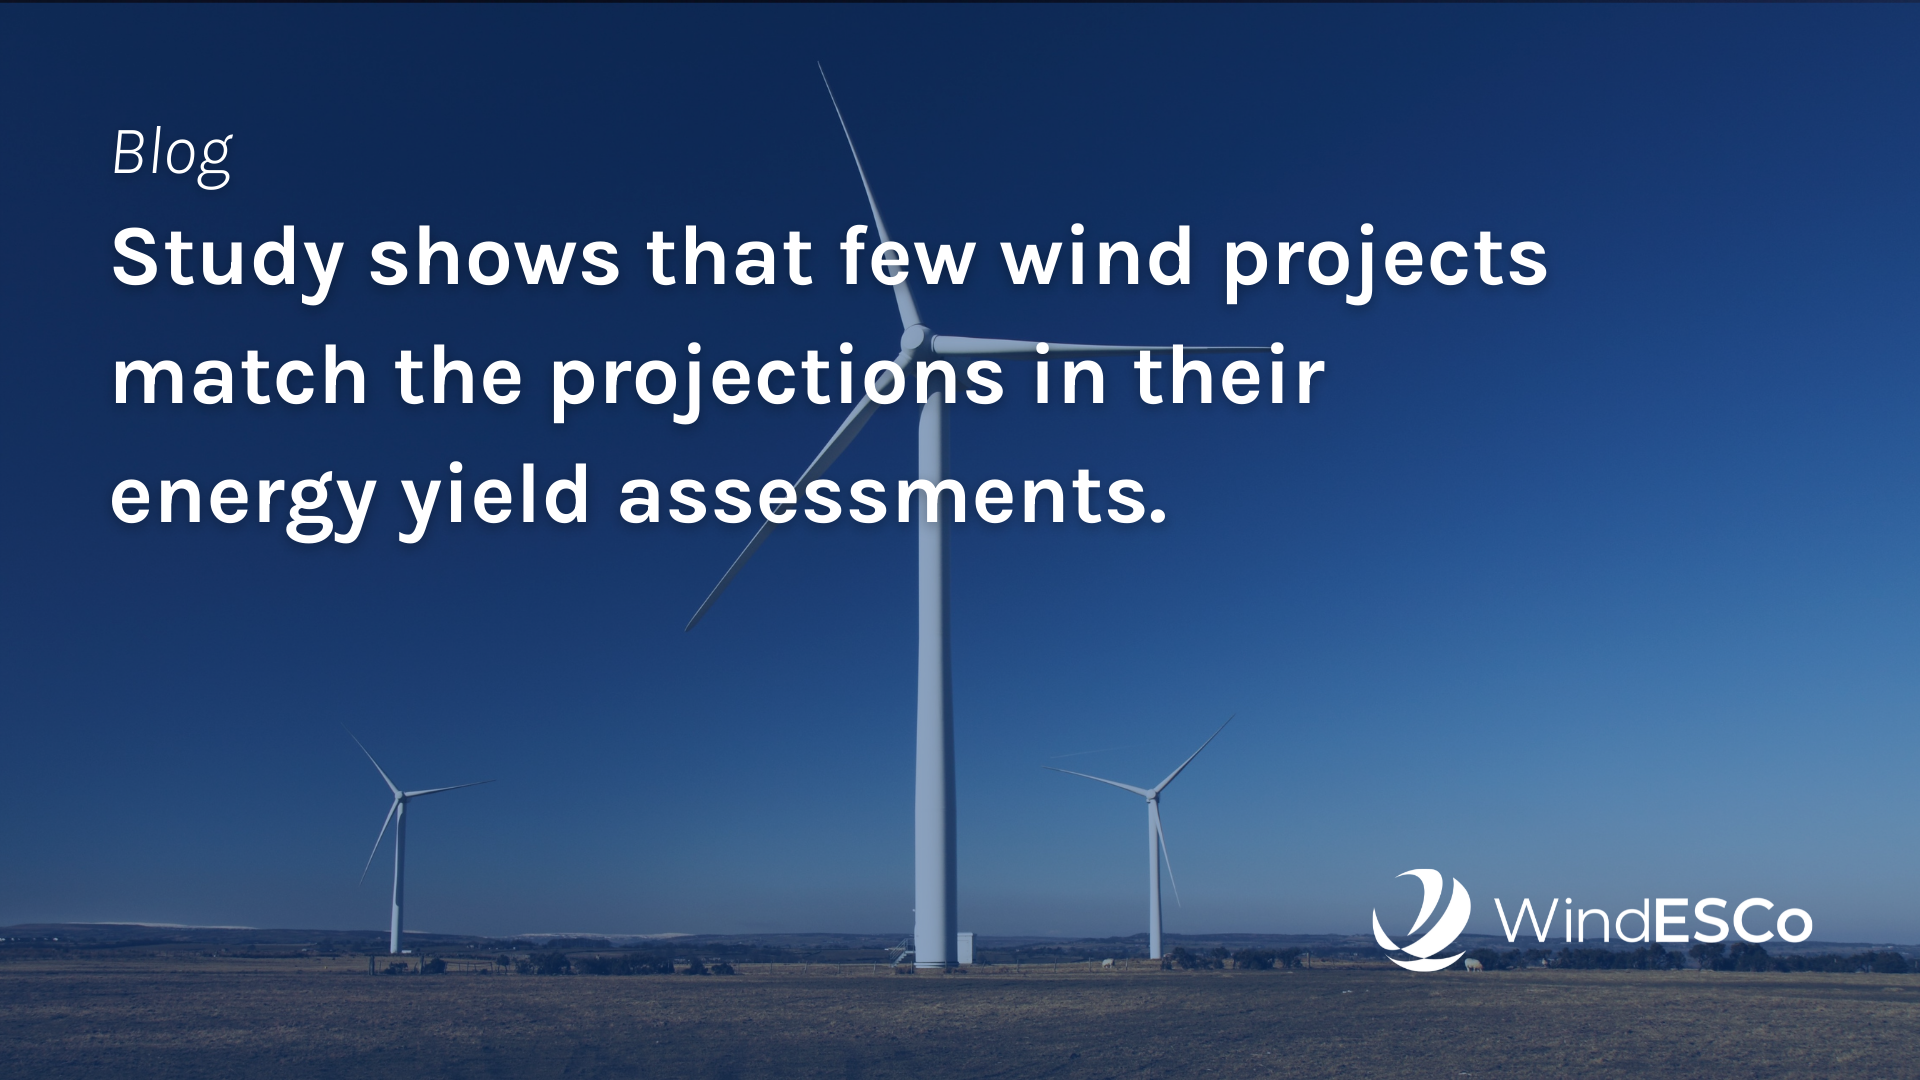 Wind projects ‘underperform against energy yield assessments’